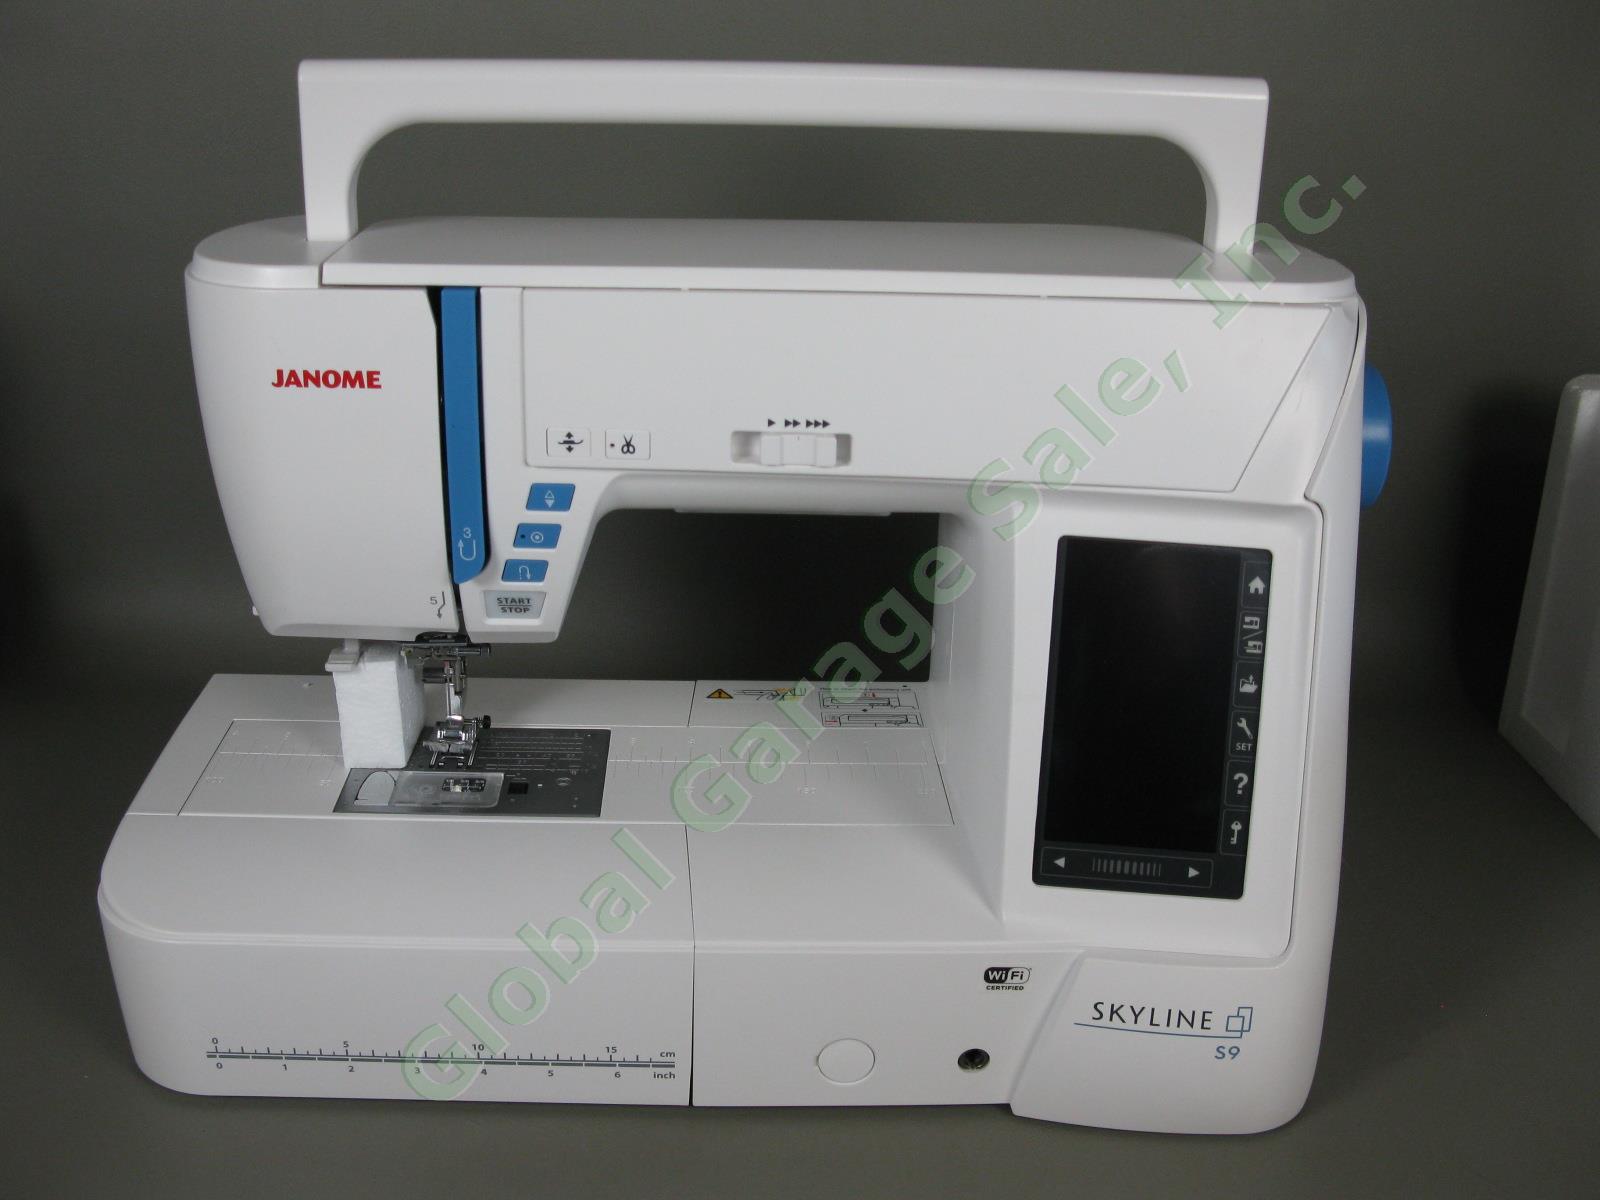 Janome Skyline S9 Sewing + Embroidery Machine Mint Condition! Barely Used! 1